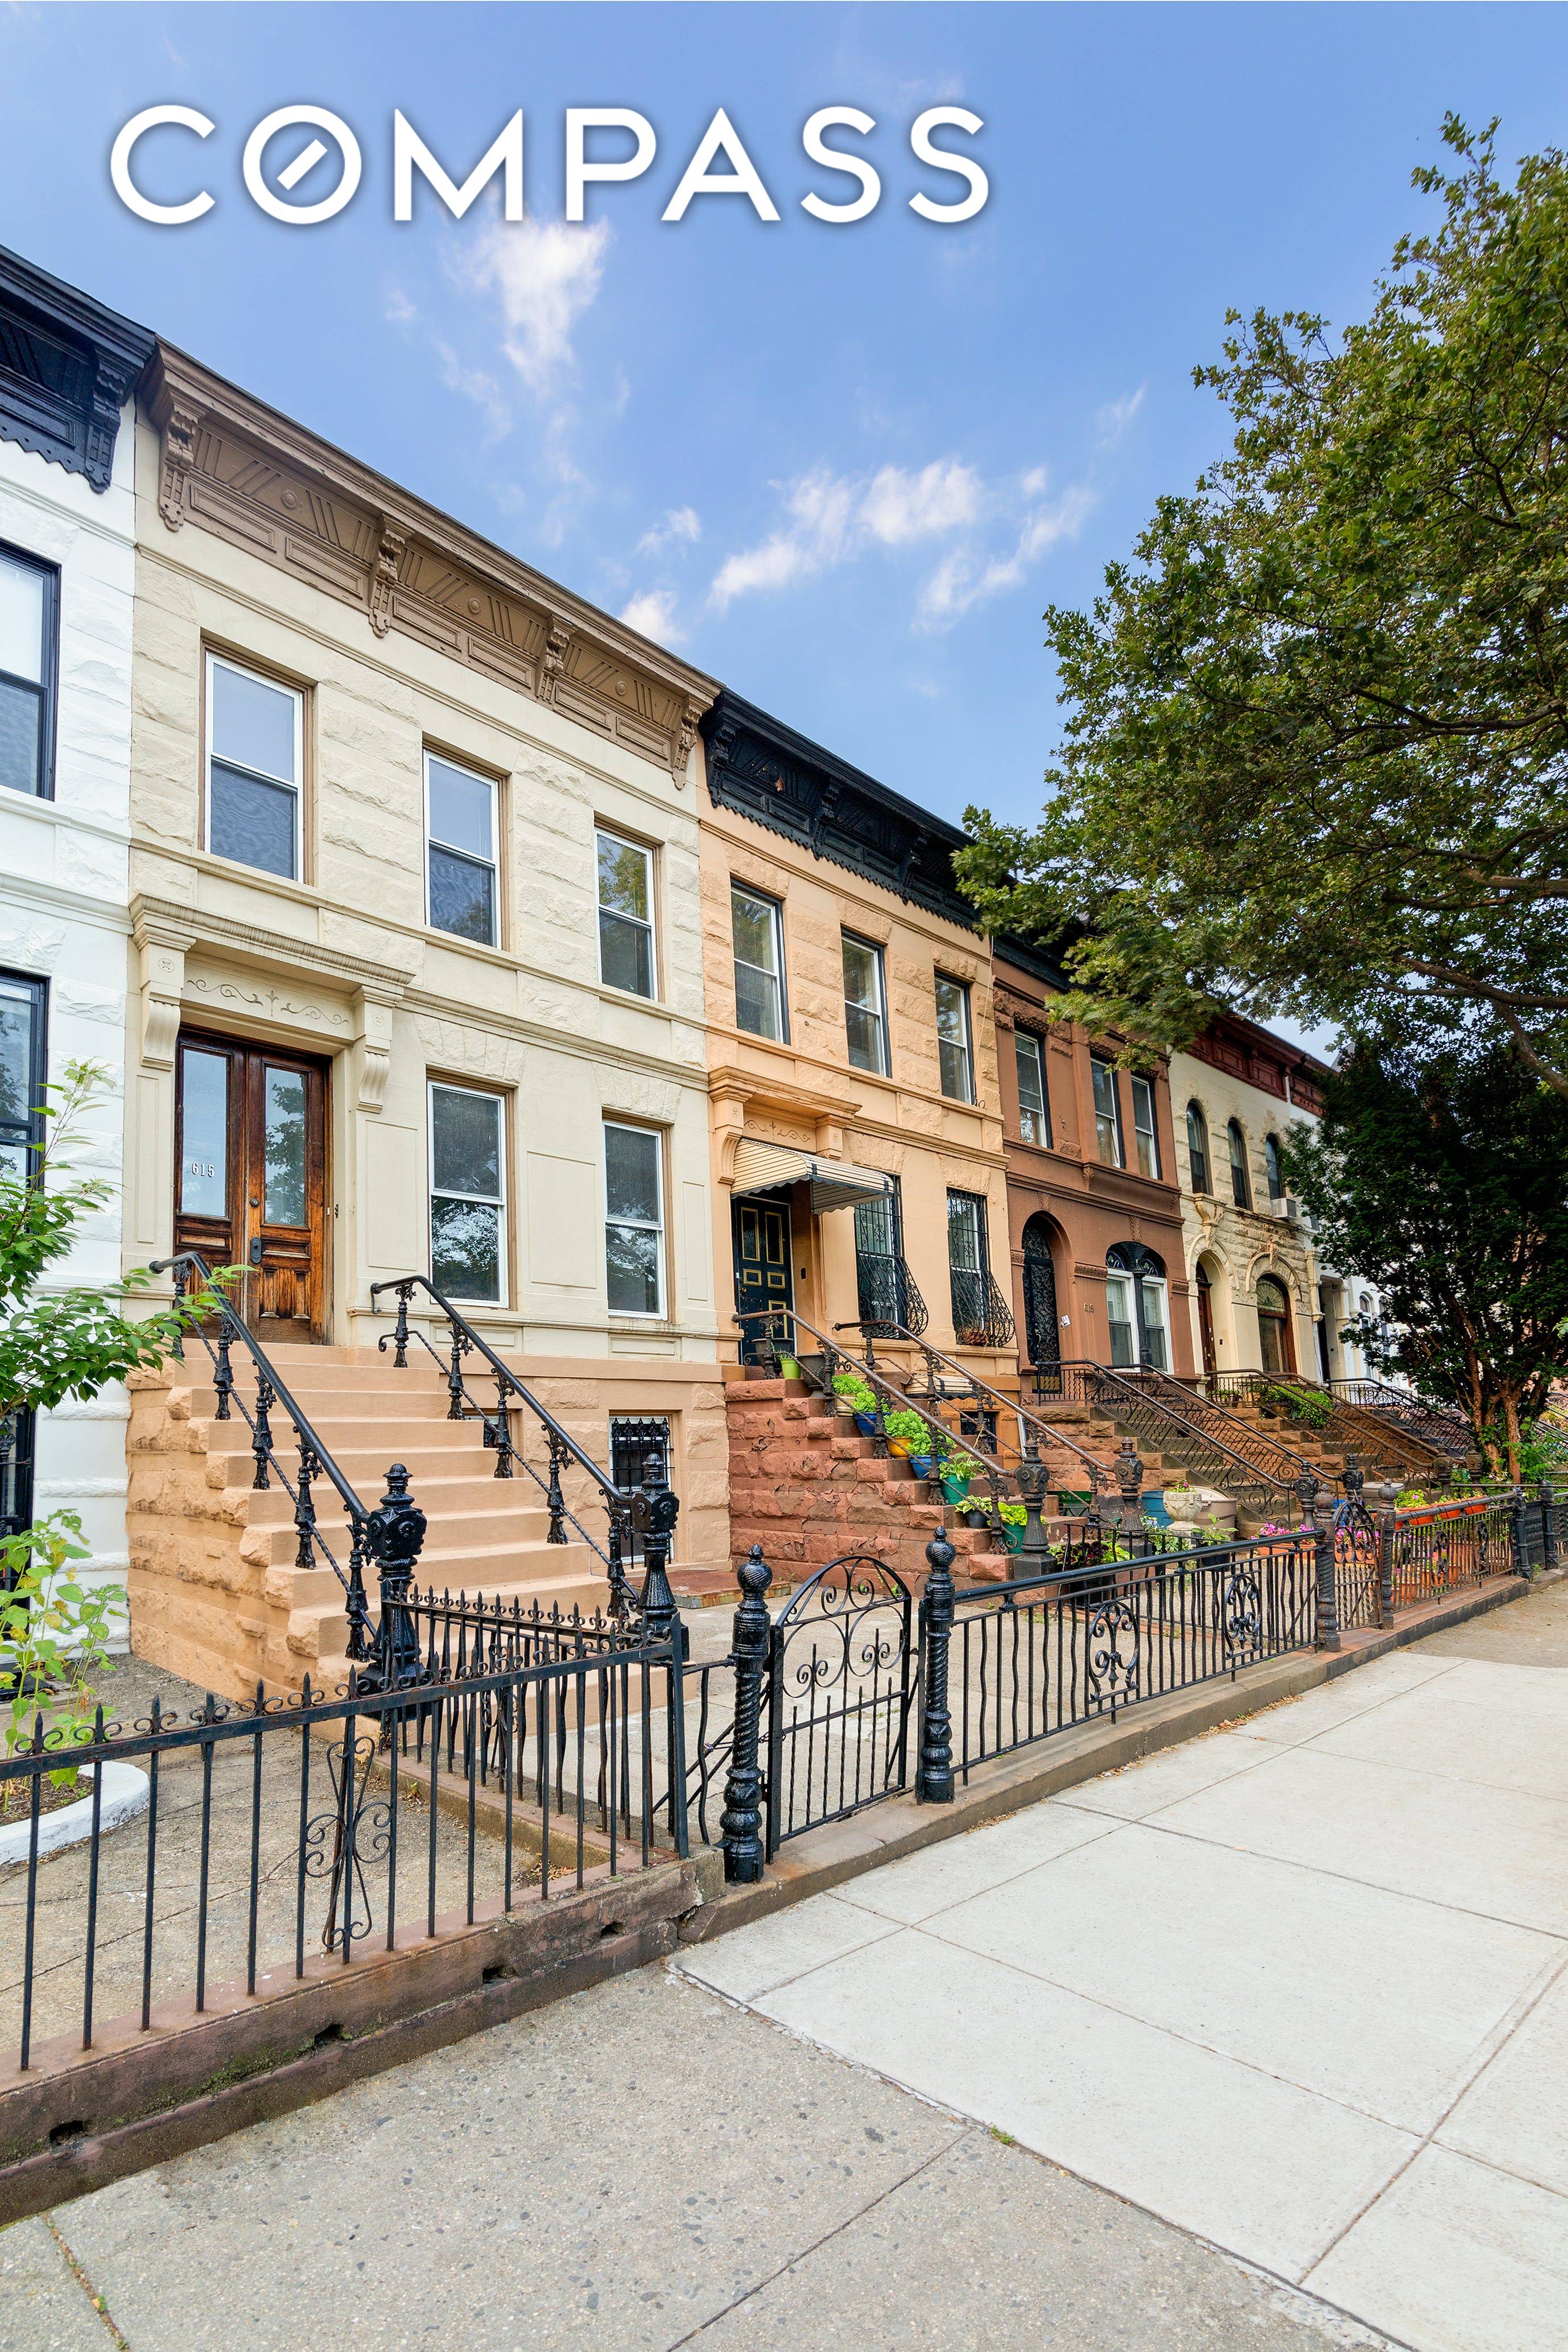 NO FEE ! Move right in ! A rare find in Bedford Stuyvesant, 615 Macdonough Street offers a single family townhouse on a beautiful tree lined block.